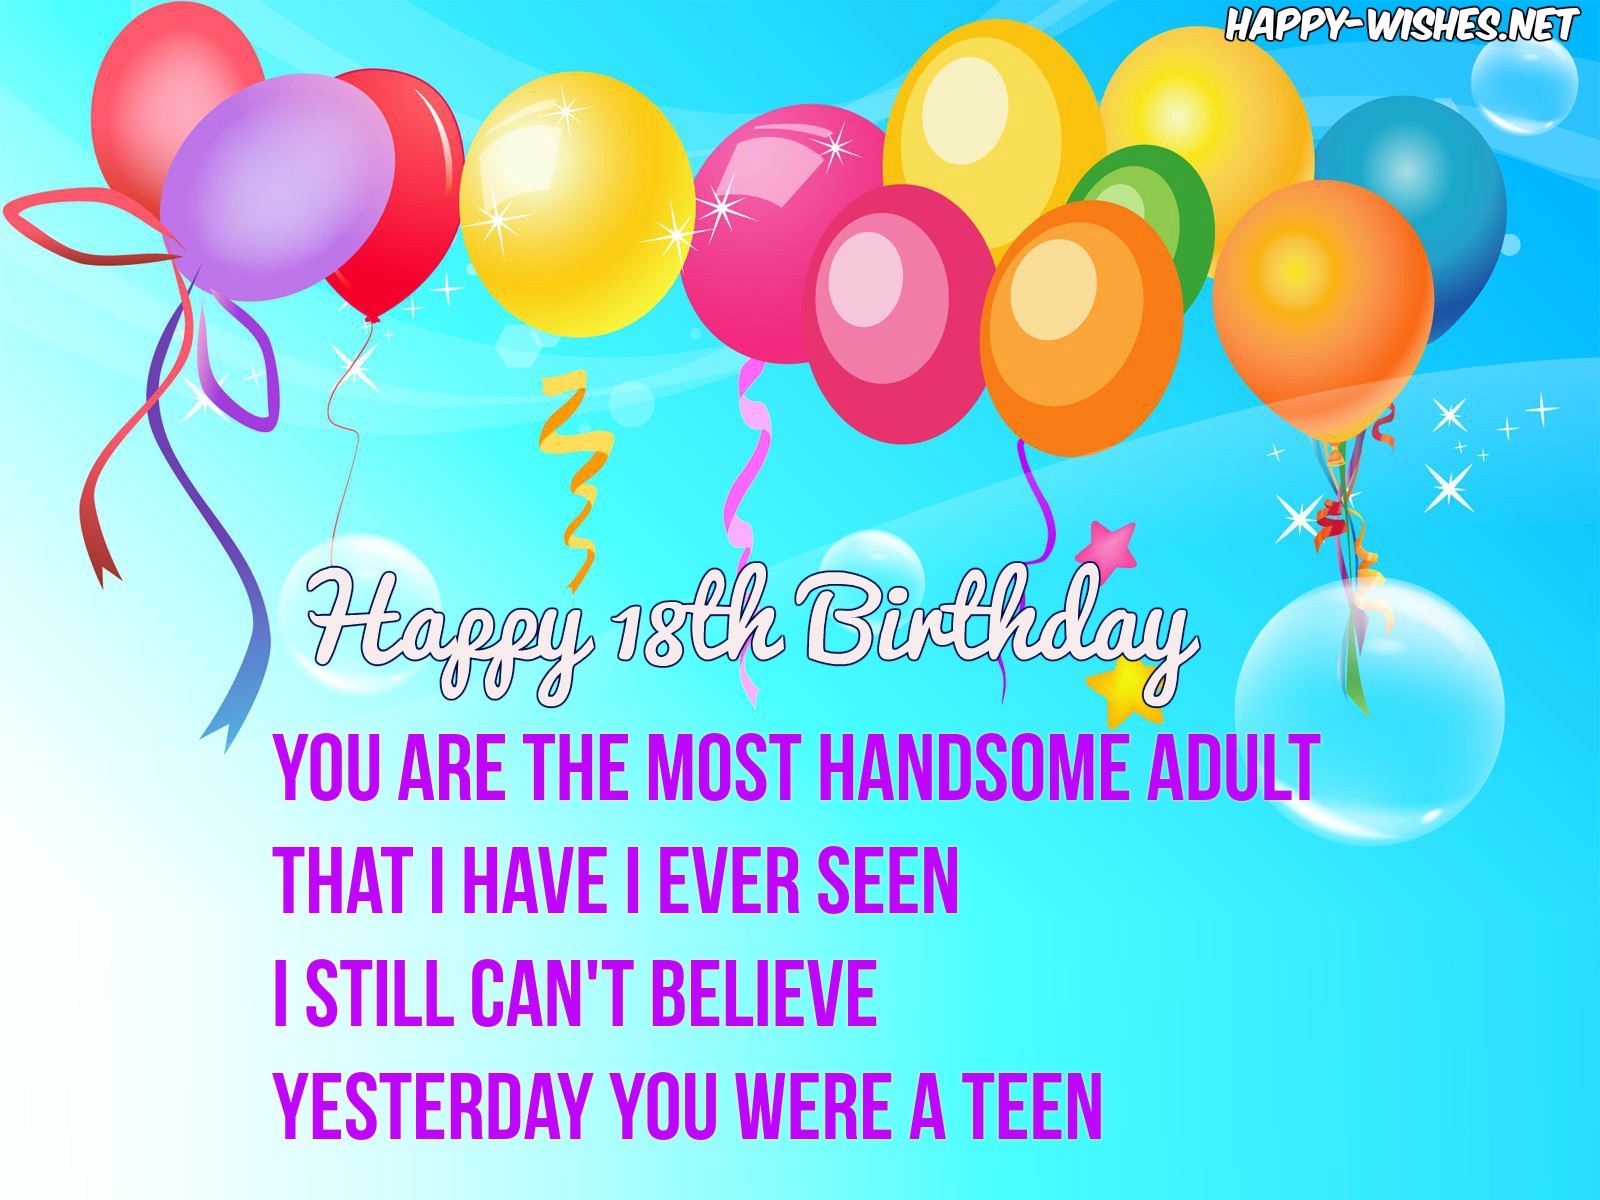 Happy 18th Birthday messages